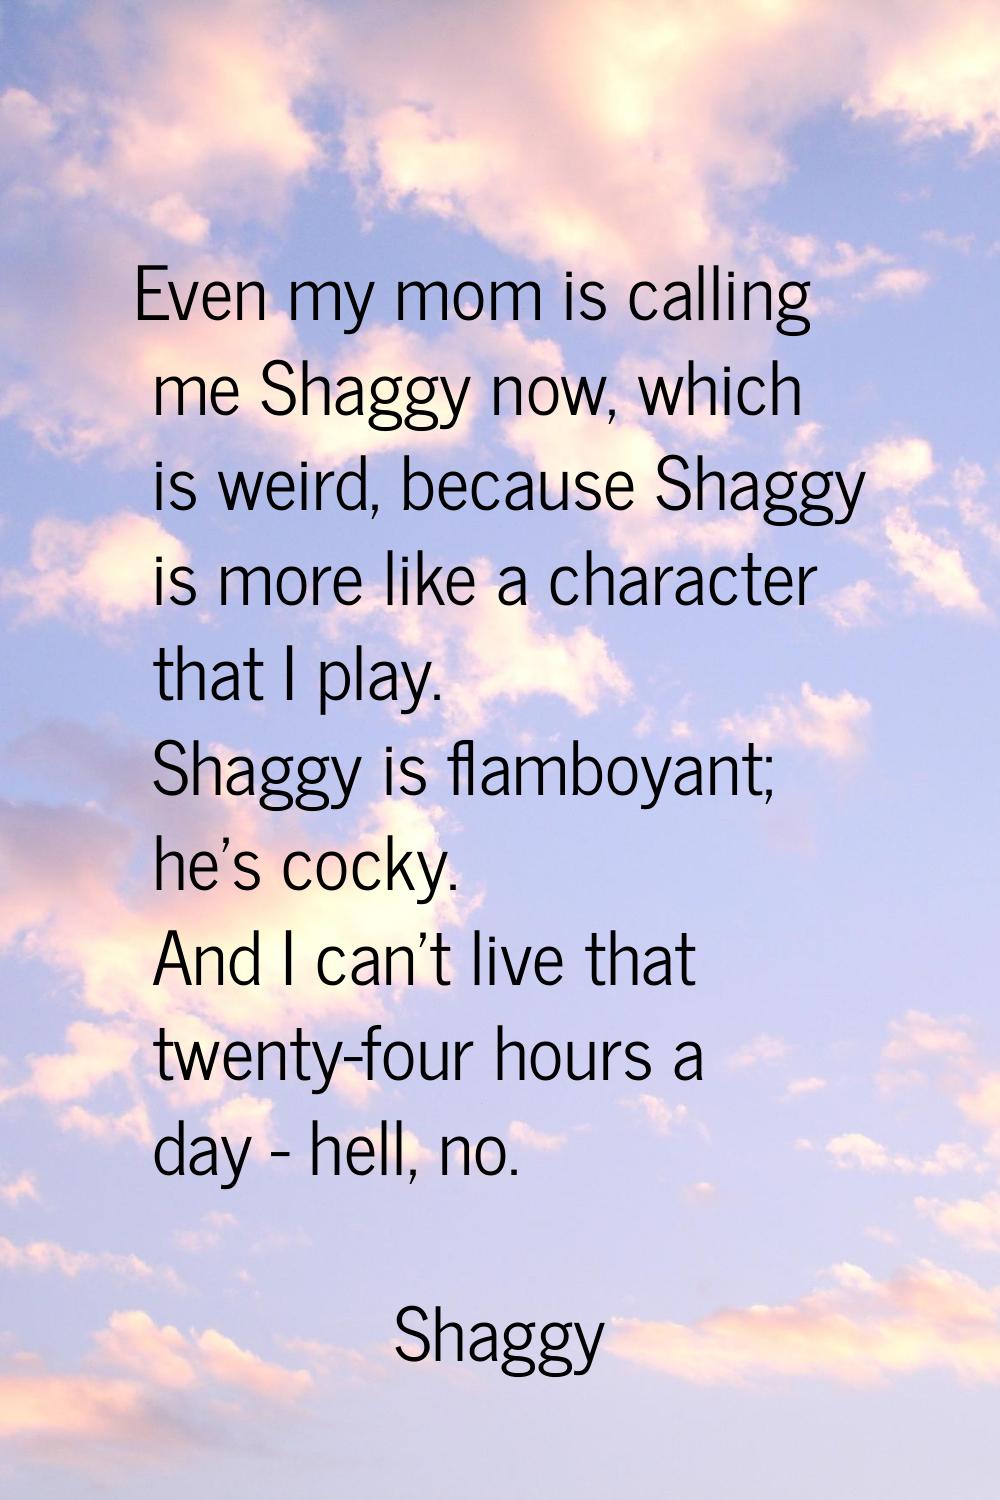 Even my mom is calling me Shaggy now, which is weird, because Shaggy is more like a character that 